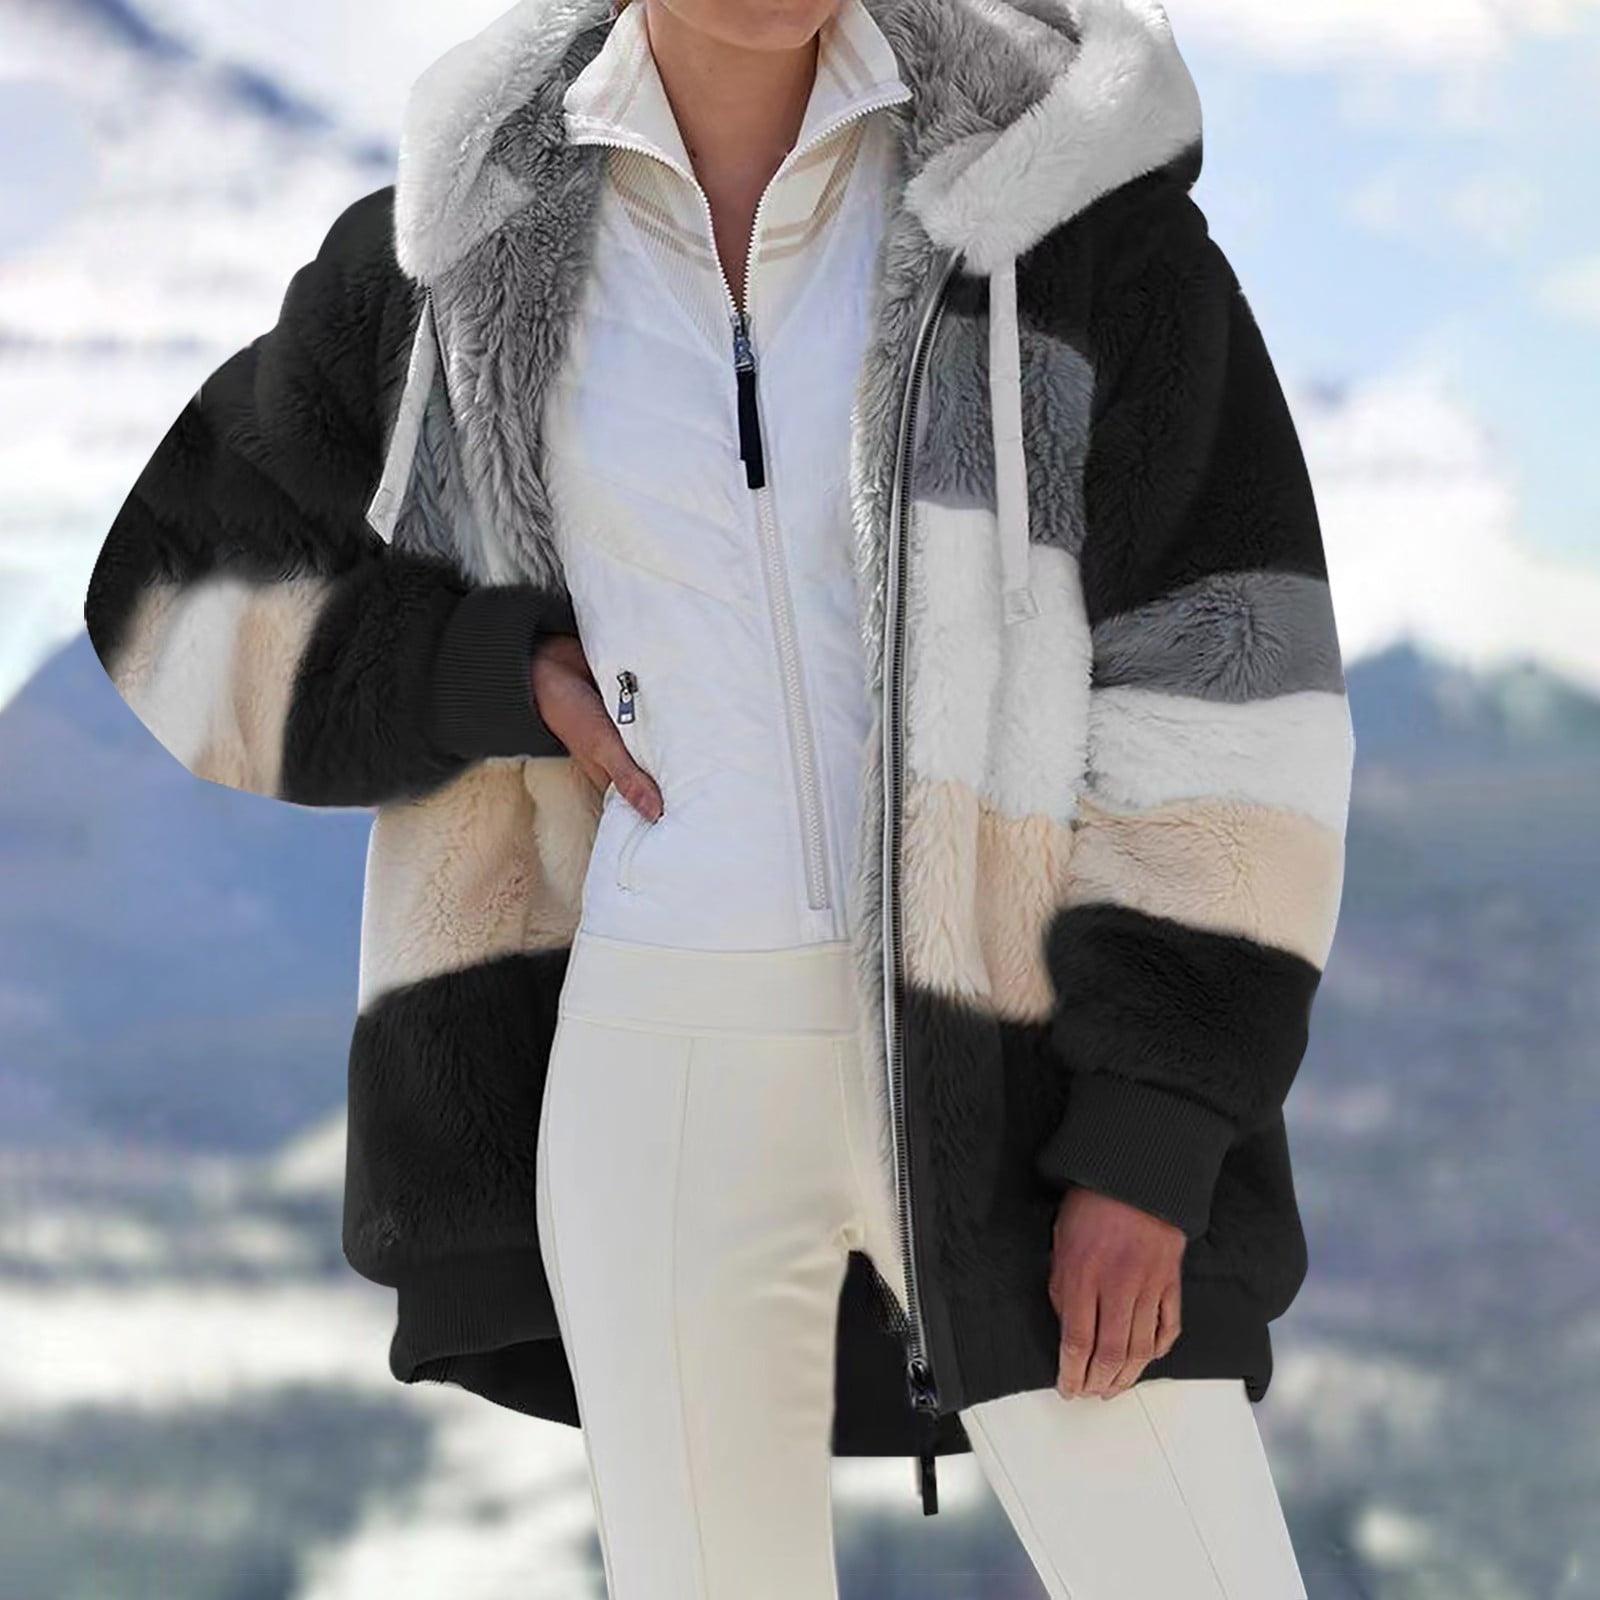 If you were to buy a jacket this winter, make it a white shearling